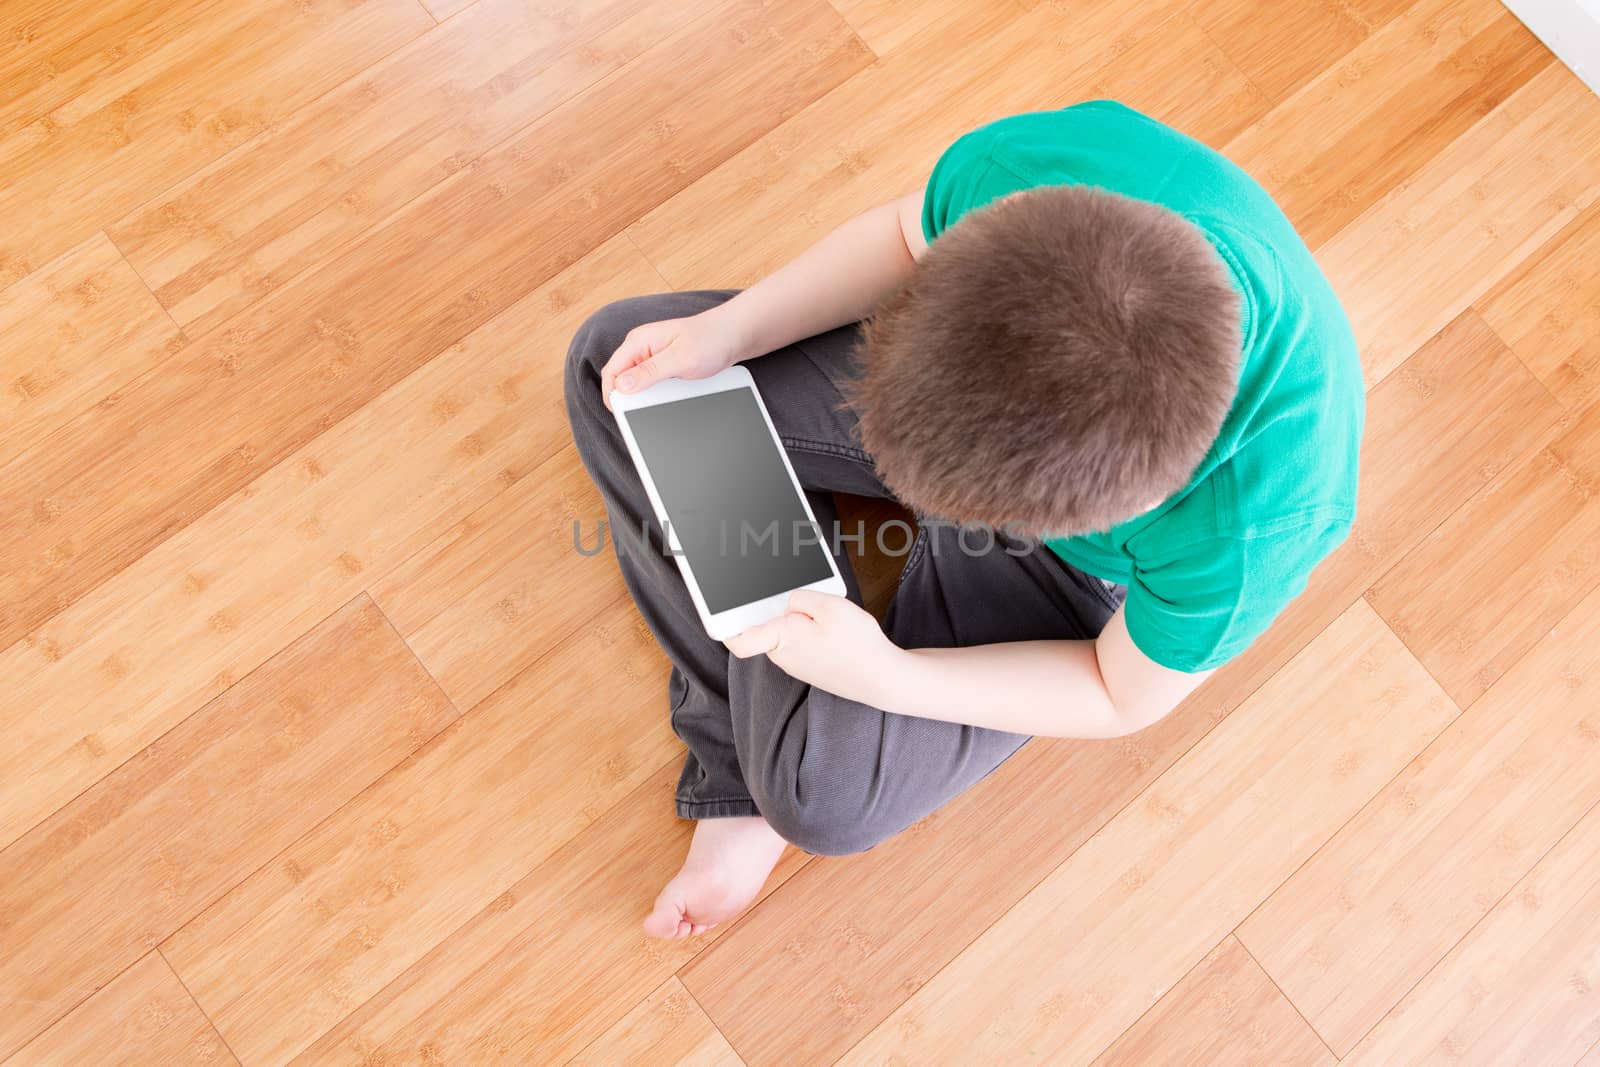 Boy on the Floor Holding Tablet in High Angle View by coskun